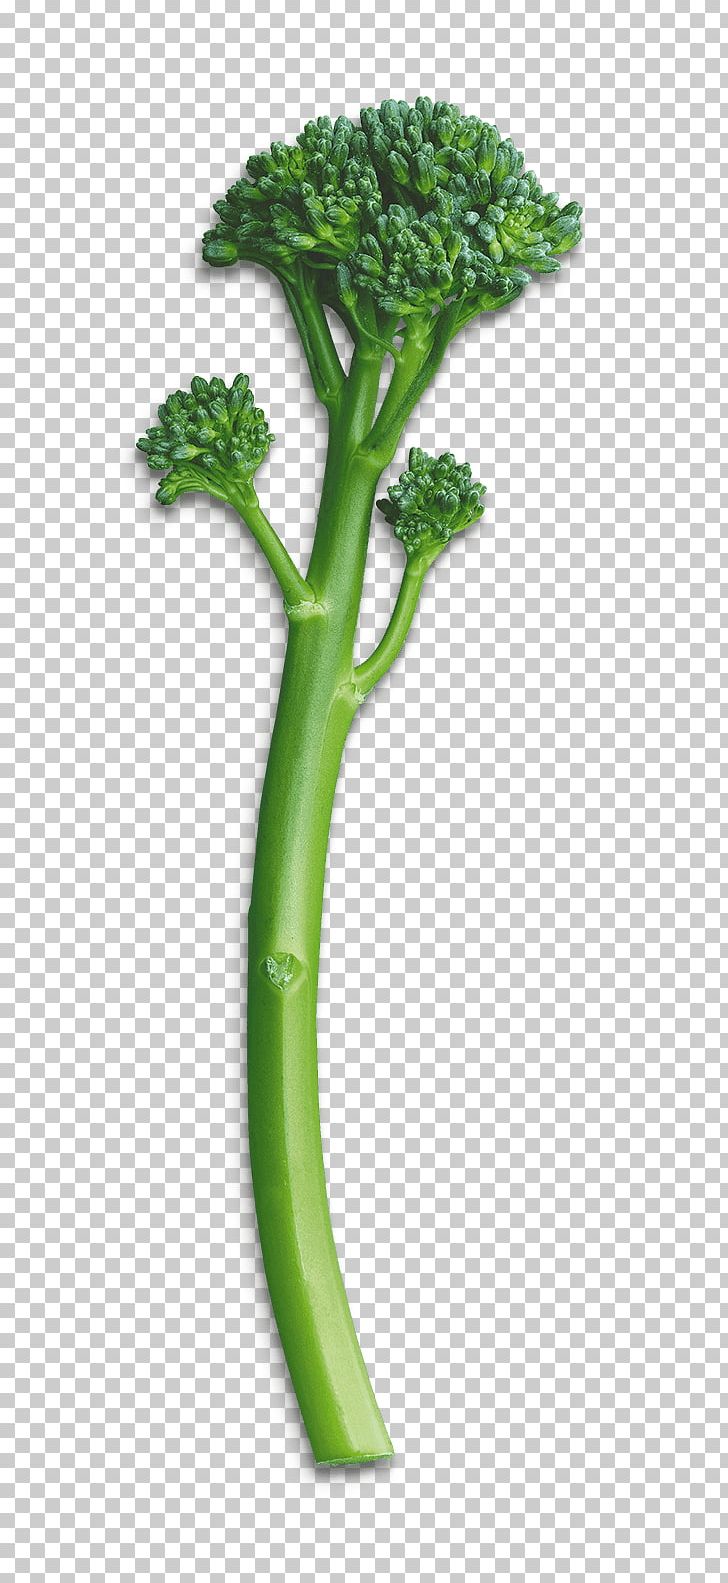 Broccolini Leaf Vegetable Law Privacy Policy PNG, Clipart, Broccoli, Broccolini, Cooking, Flowerpot, Information Free PNG Download